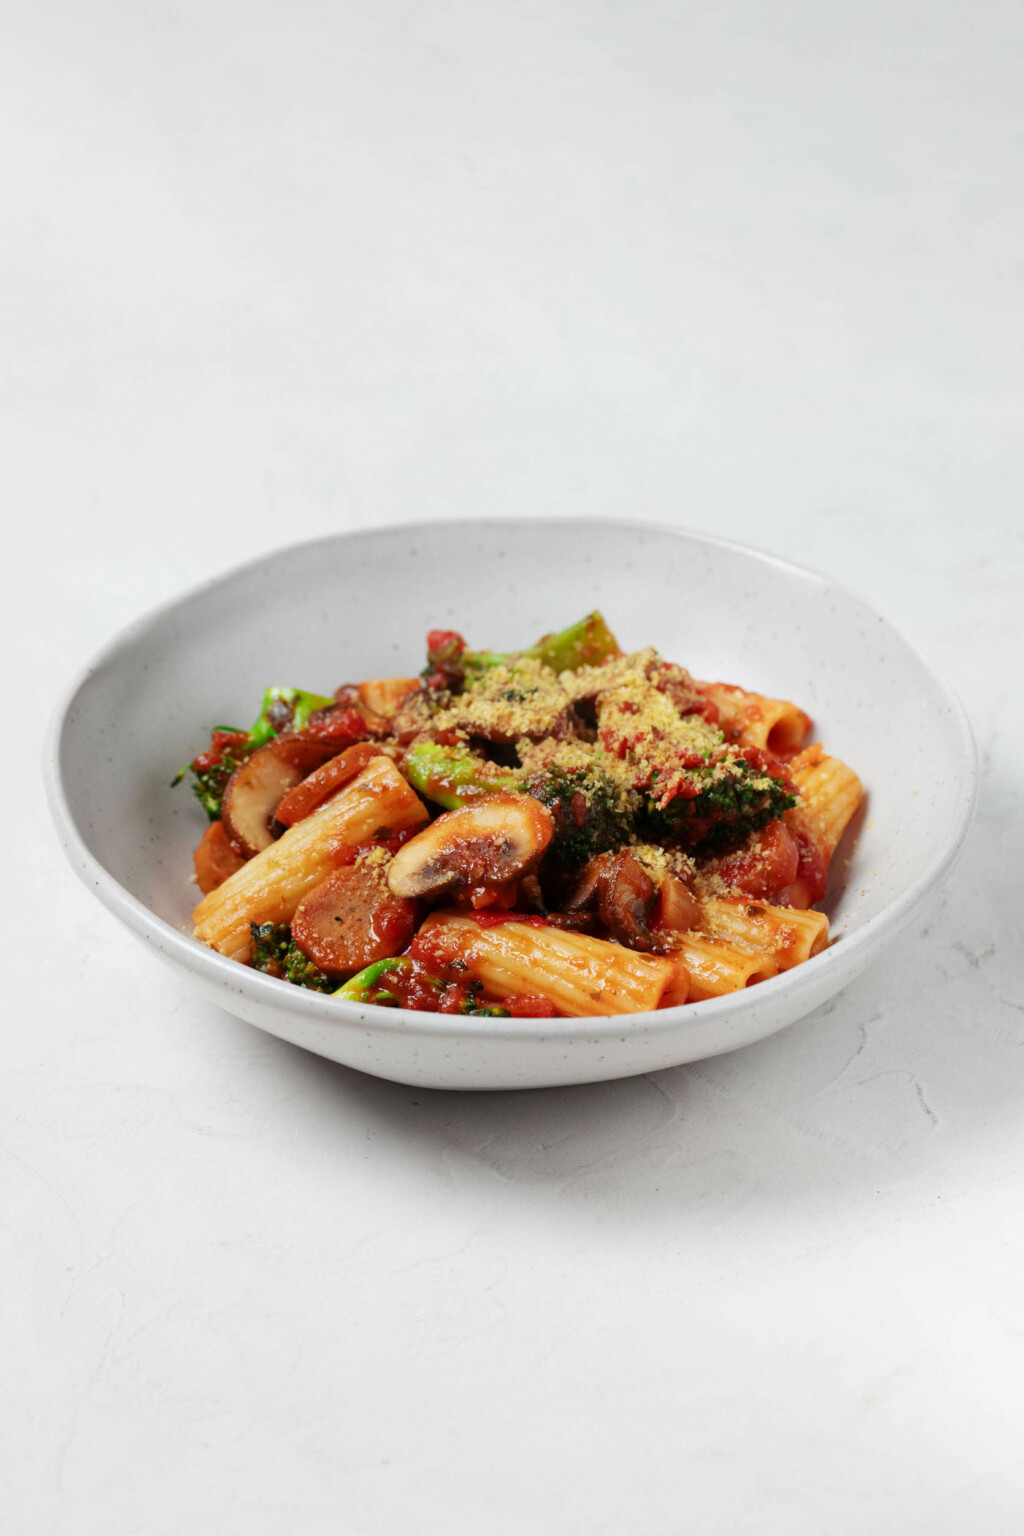 An angled image of a white bowl, which is filled with a vegan pasta dish made with plant-based sausage, broccoli, and marinara sauce.